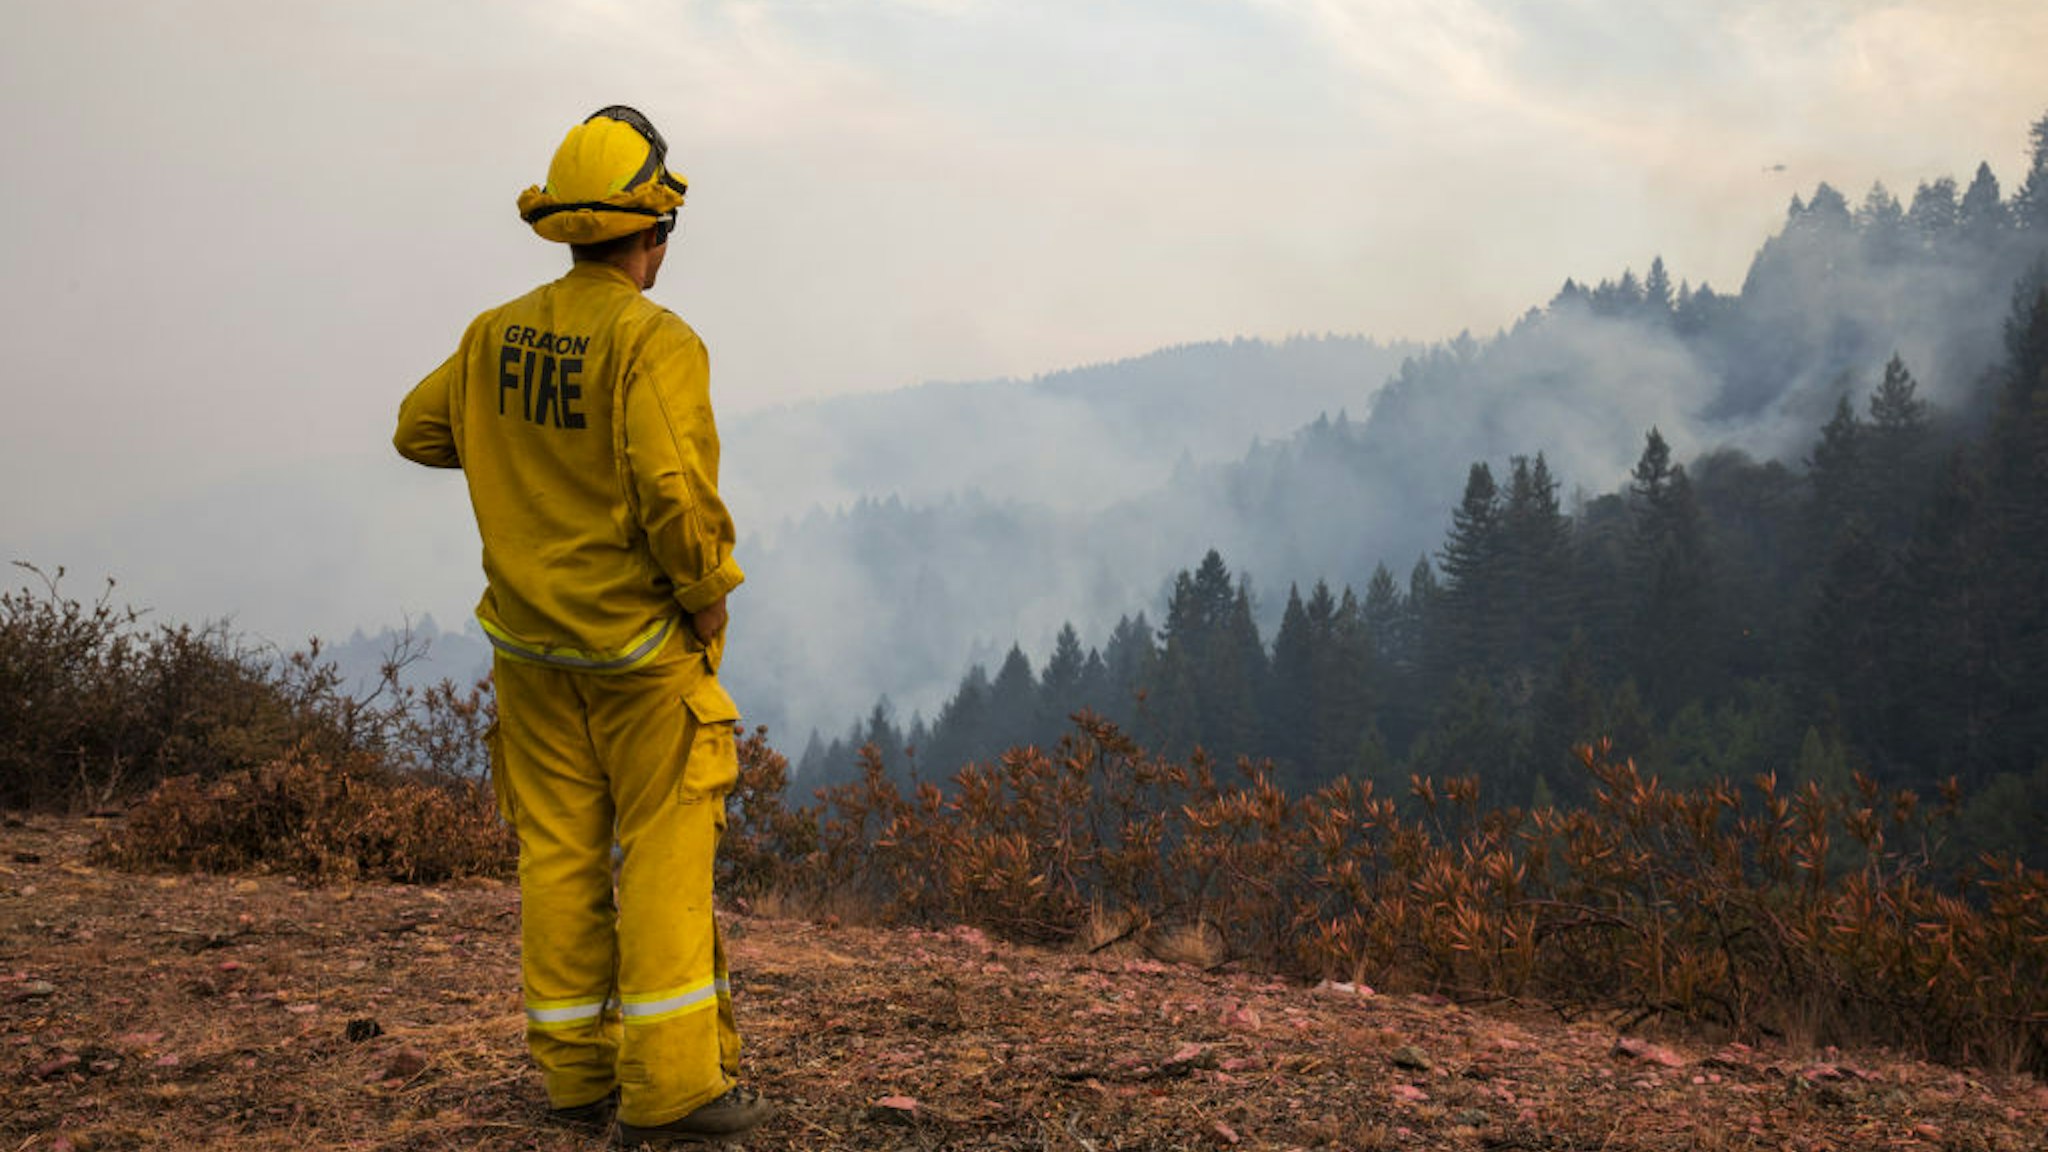 Dustin Blumenthal of the Graton Fire Department watches over spot fires on Big Ridge, seen smoldering in the background, during the Walbridge portion of the LNU Lightning Complex fire in Sonoma County, California, U.S., on Saturday, Aug. 22, 2020. More than 360 blazes are burning in California, forcing mass evacuations in the northern part of the state and creating an air quality emergency. Photographer: Philip Pacheco/Bloomberg via Getty Images